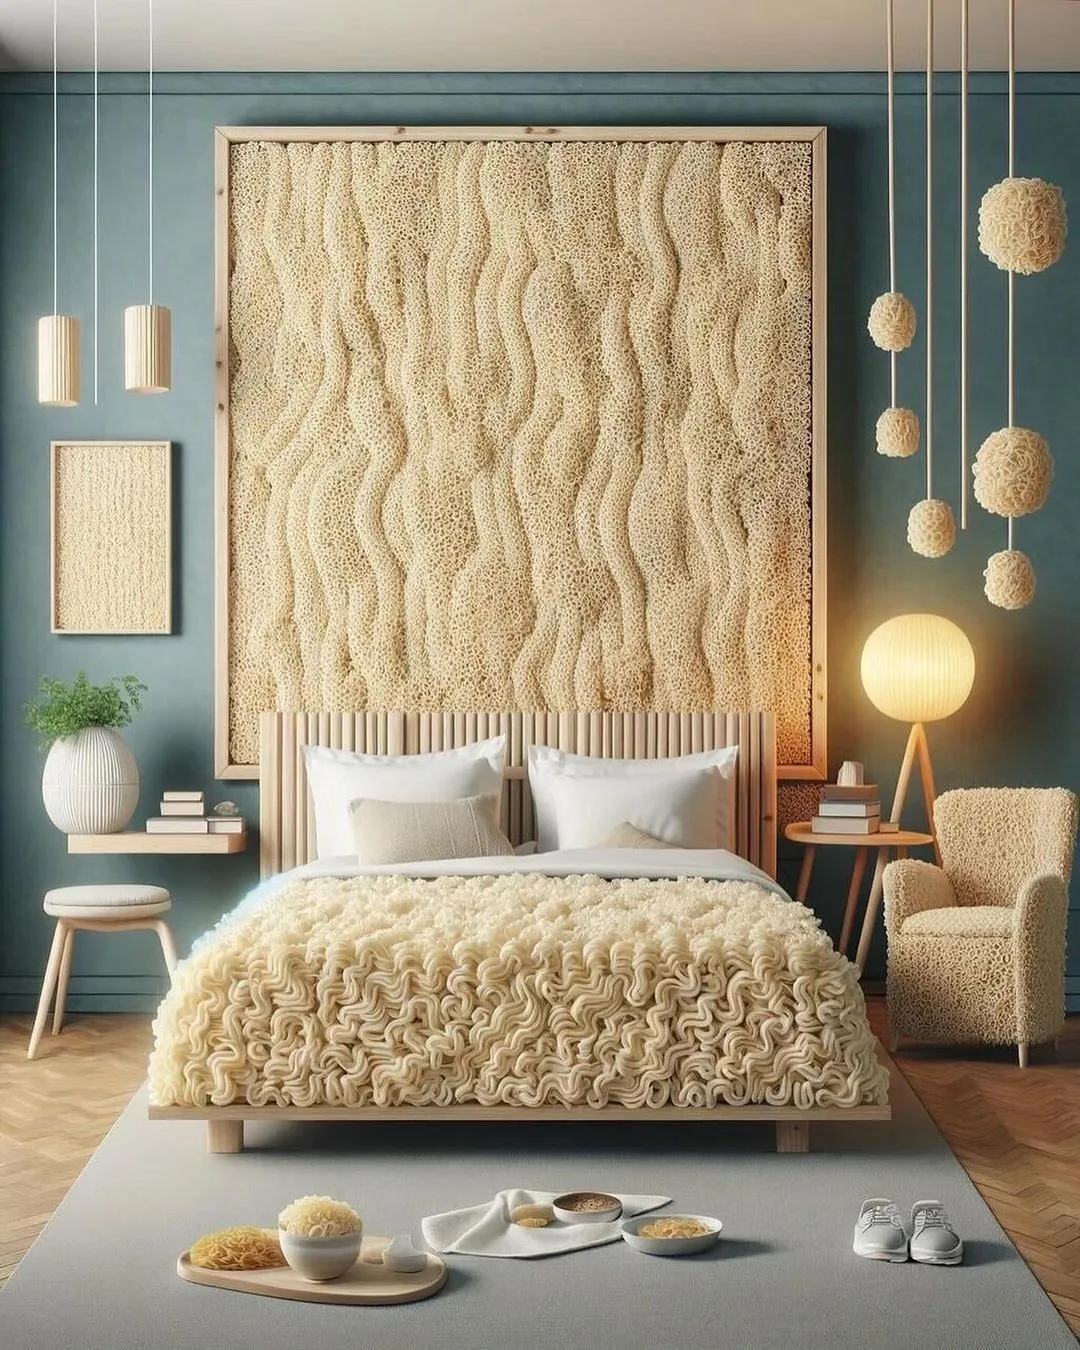 Noodle Bed Designs: Creative Beds Inspired by Instant Noodles